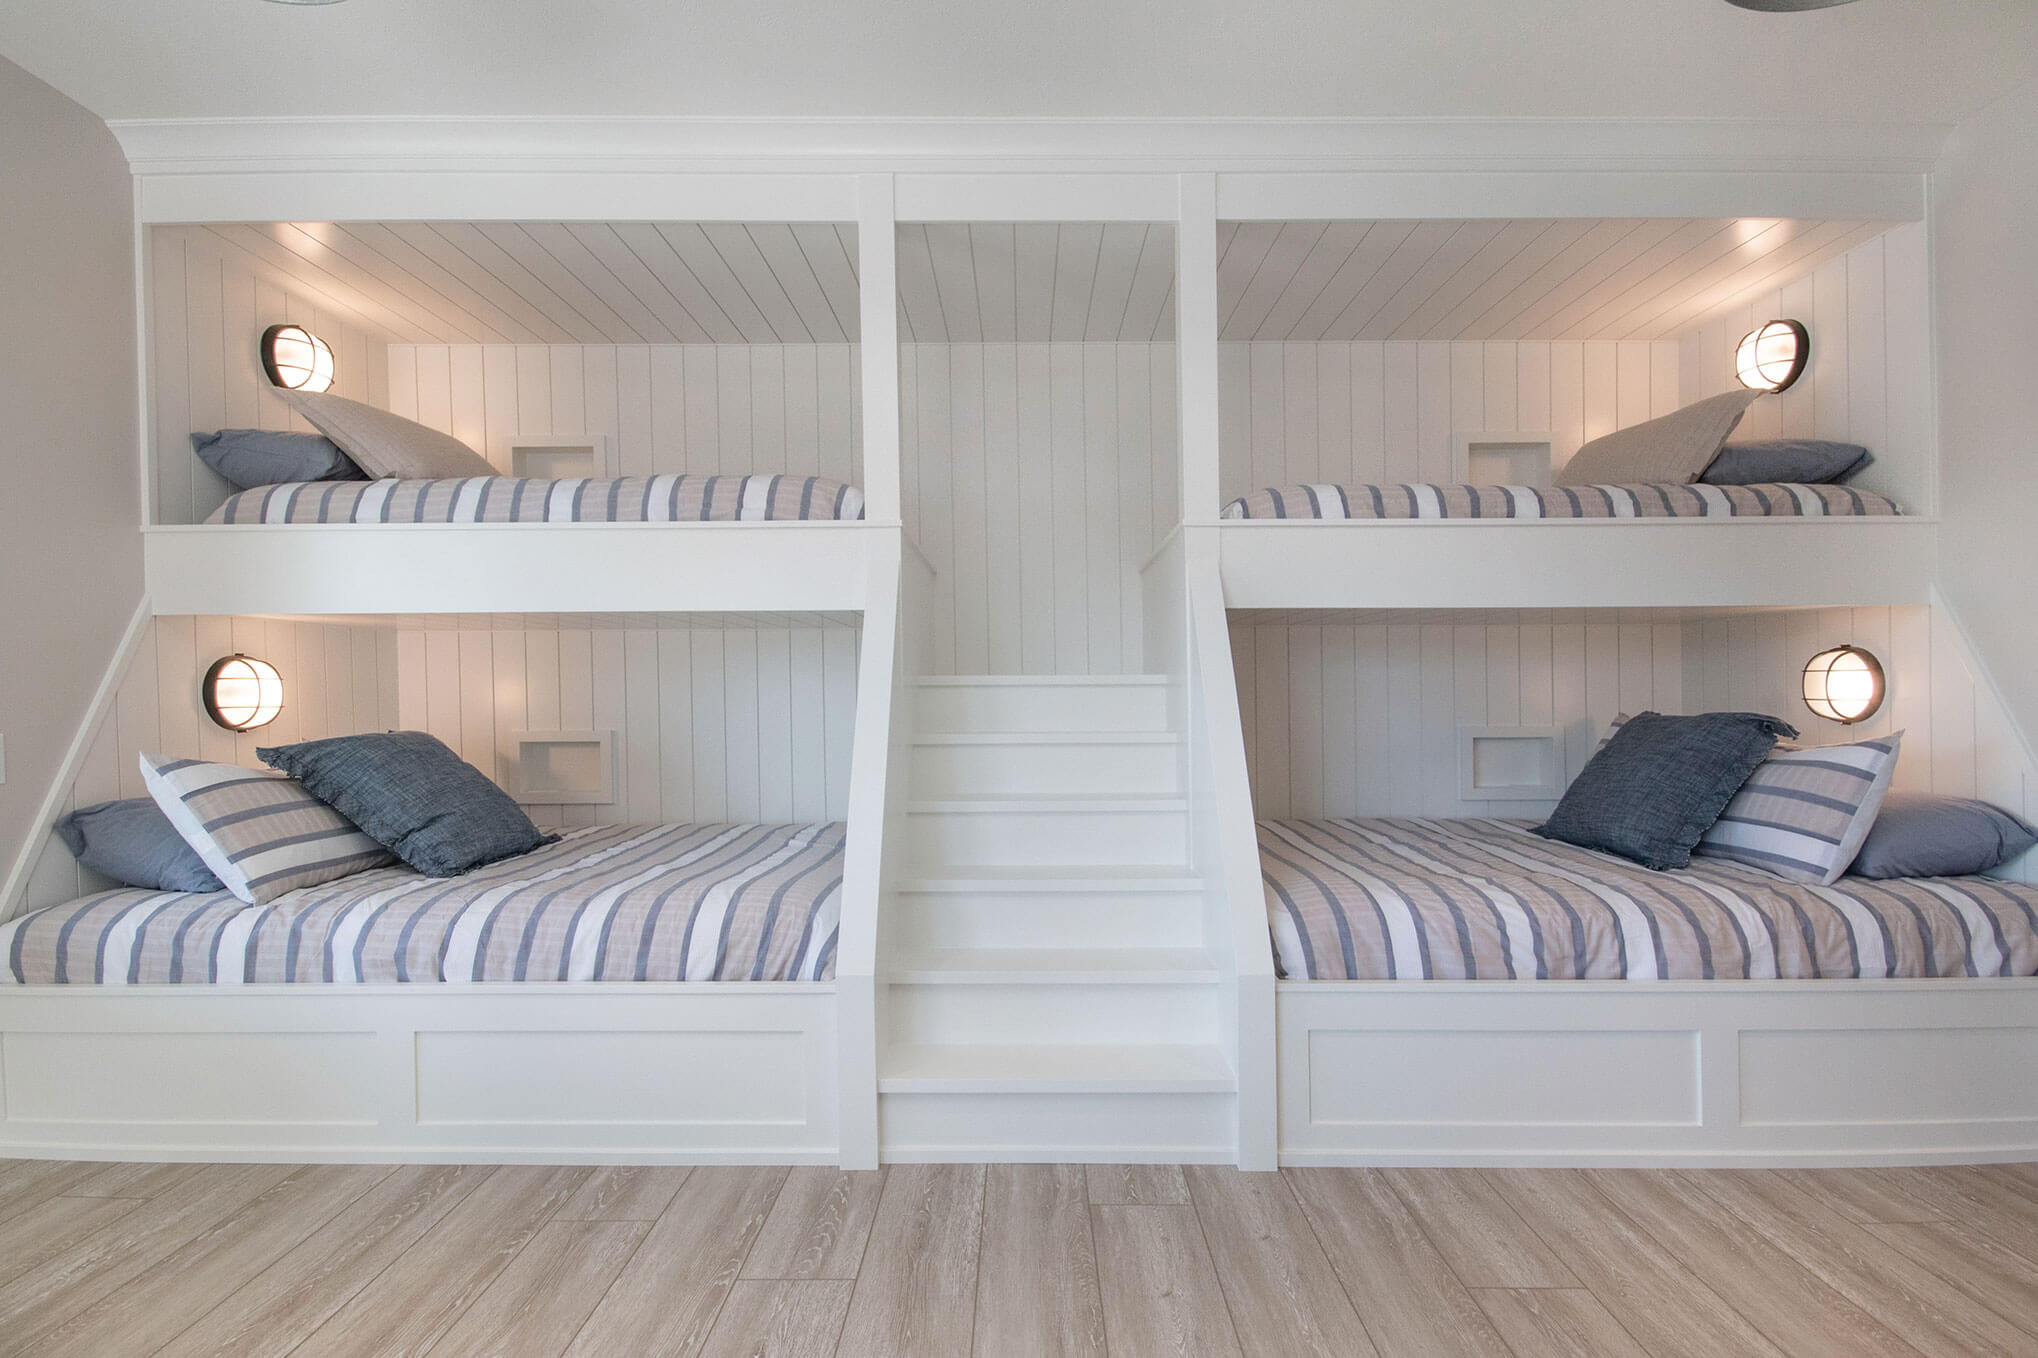 25 Bunk Bed Ideas For Small Bedrooms, Bunk Bed On Wall